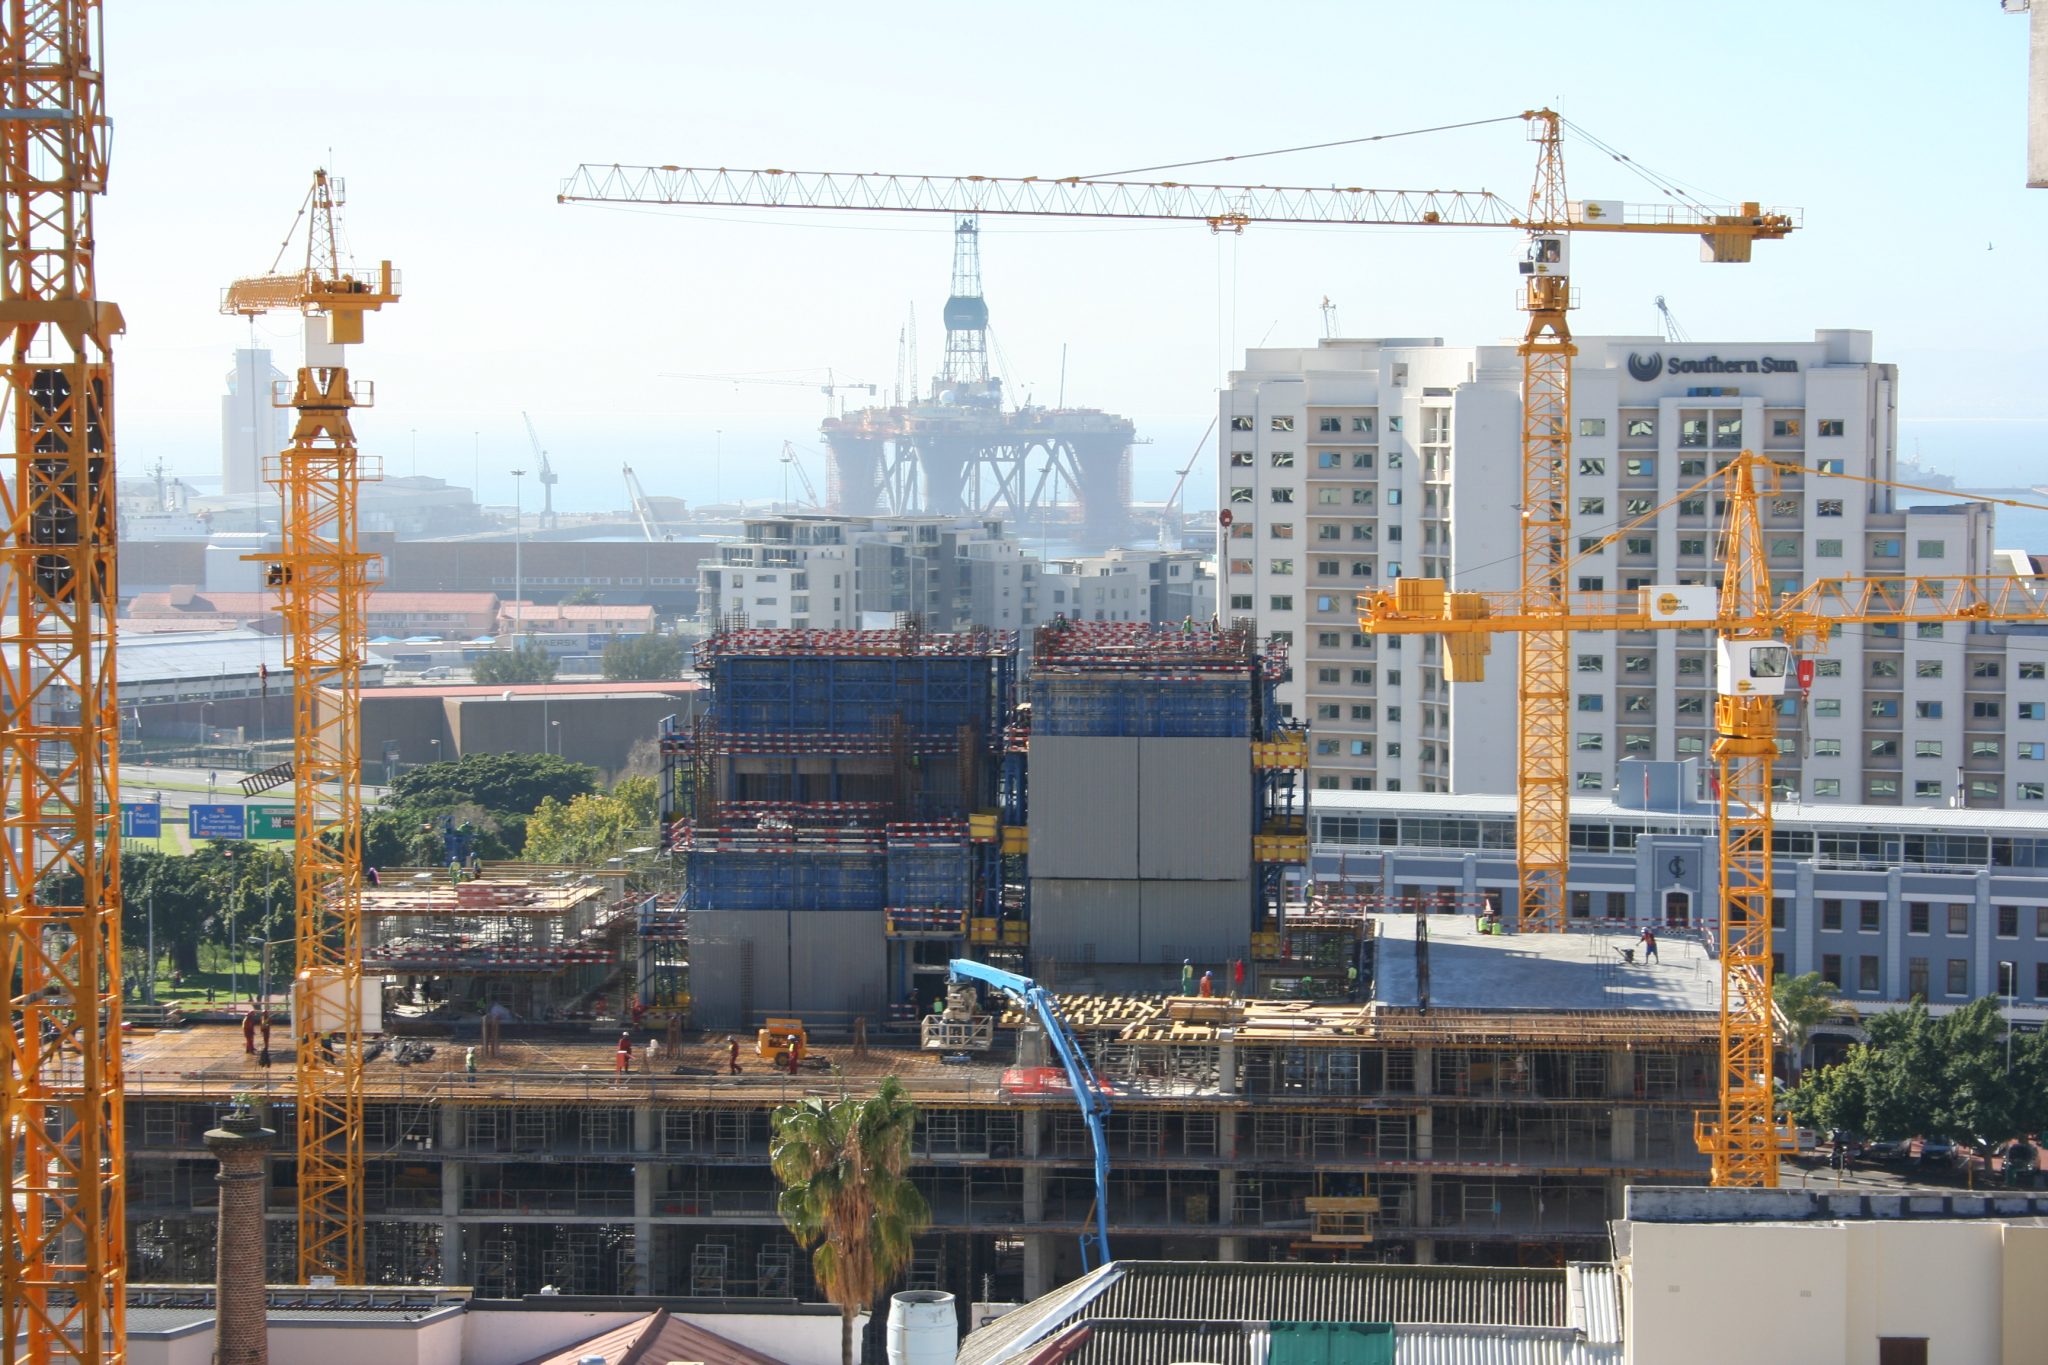 Zimbabwe construction sector most poor in Africa says BMI report